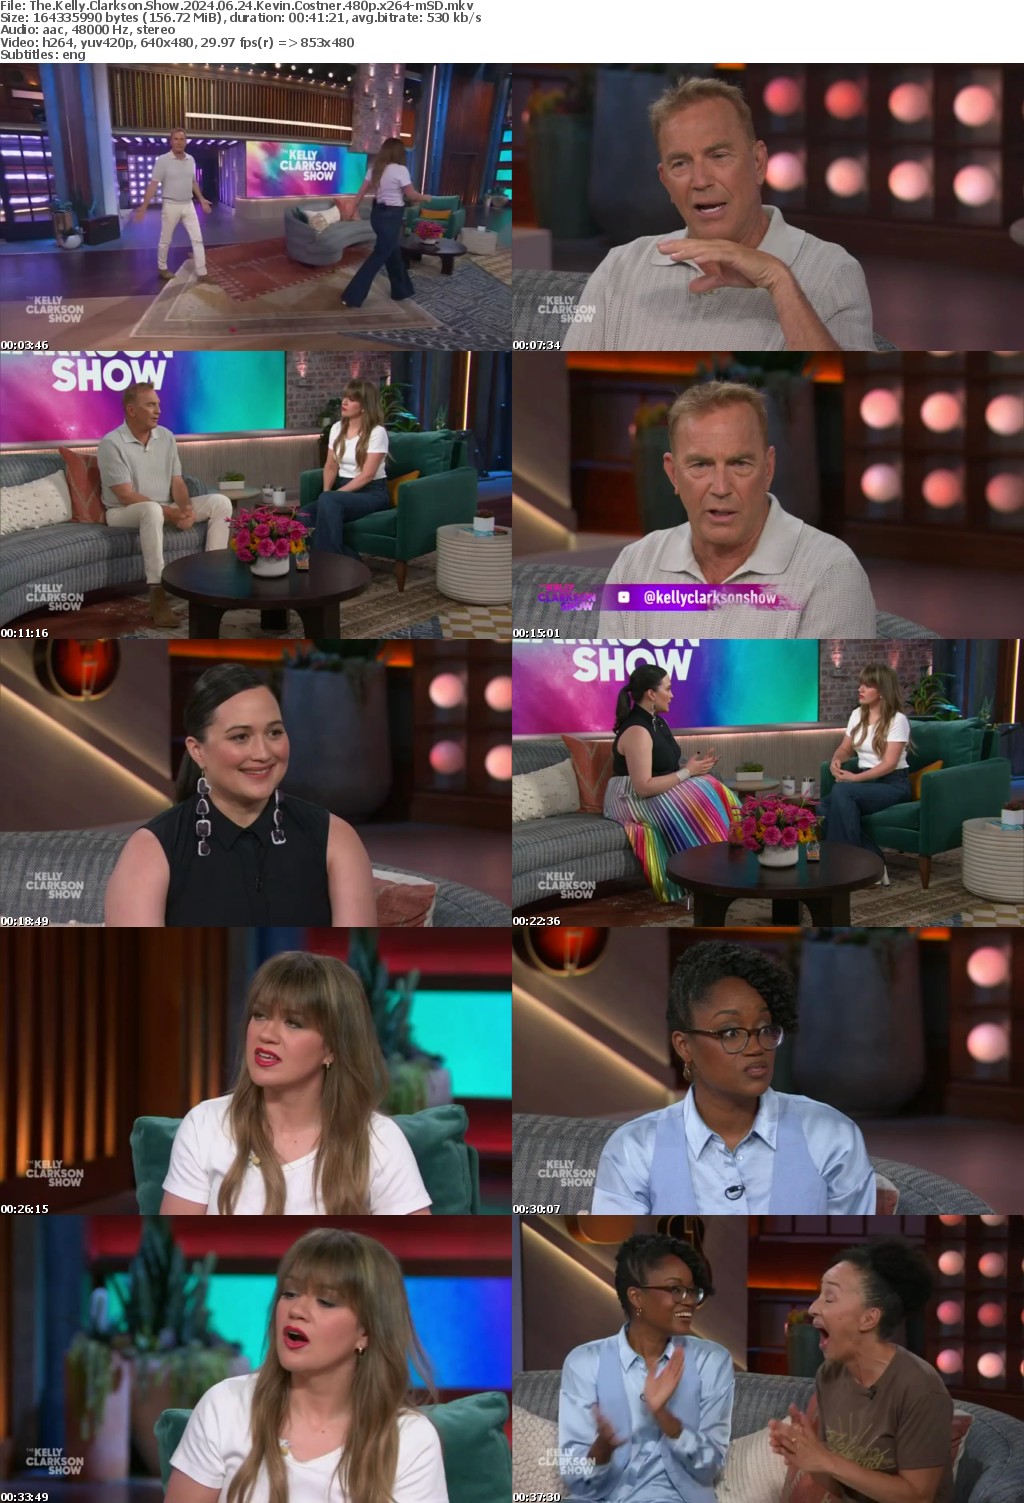 The Kelly Clarkson Show 2024 06 24 Kevin Costner 480p x264-mSD